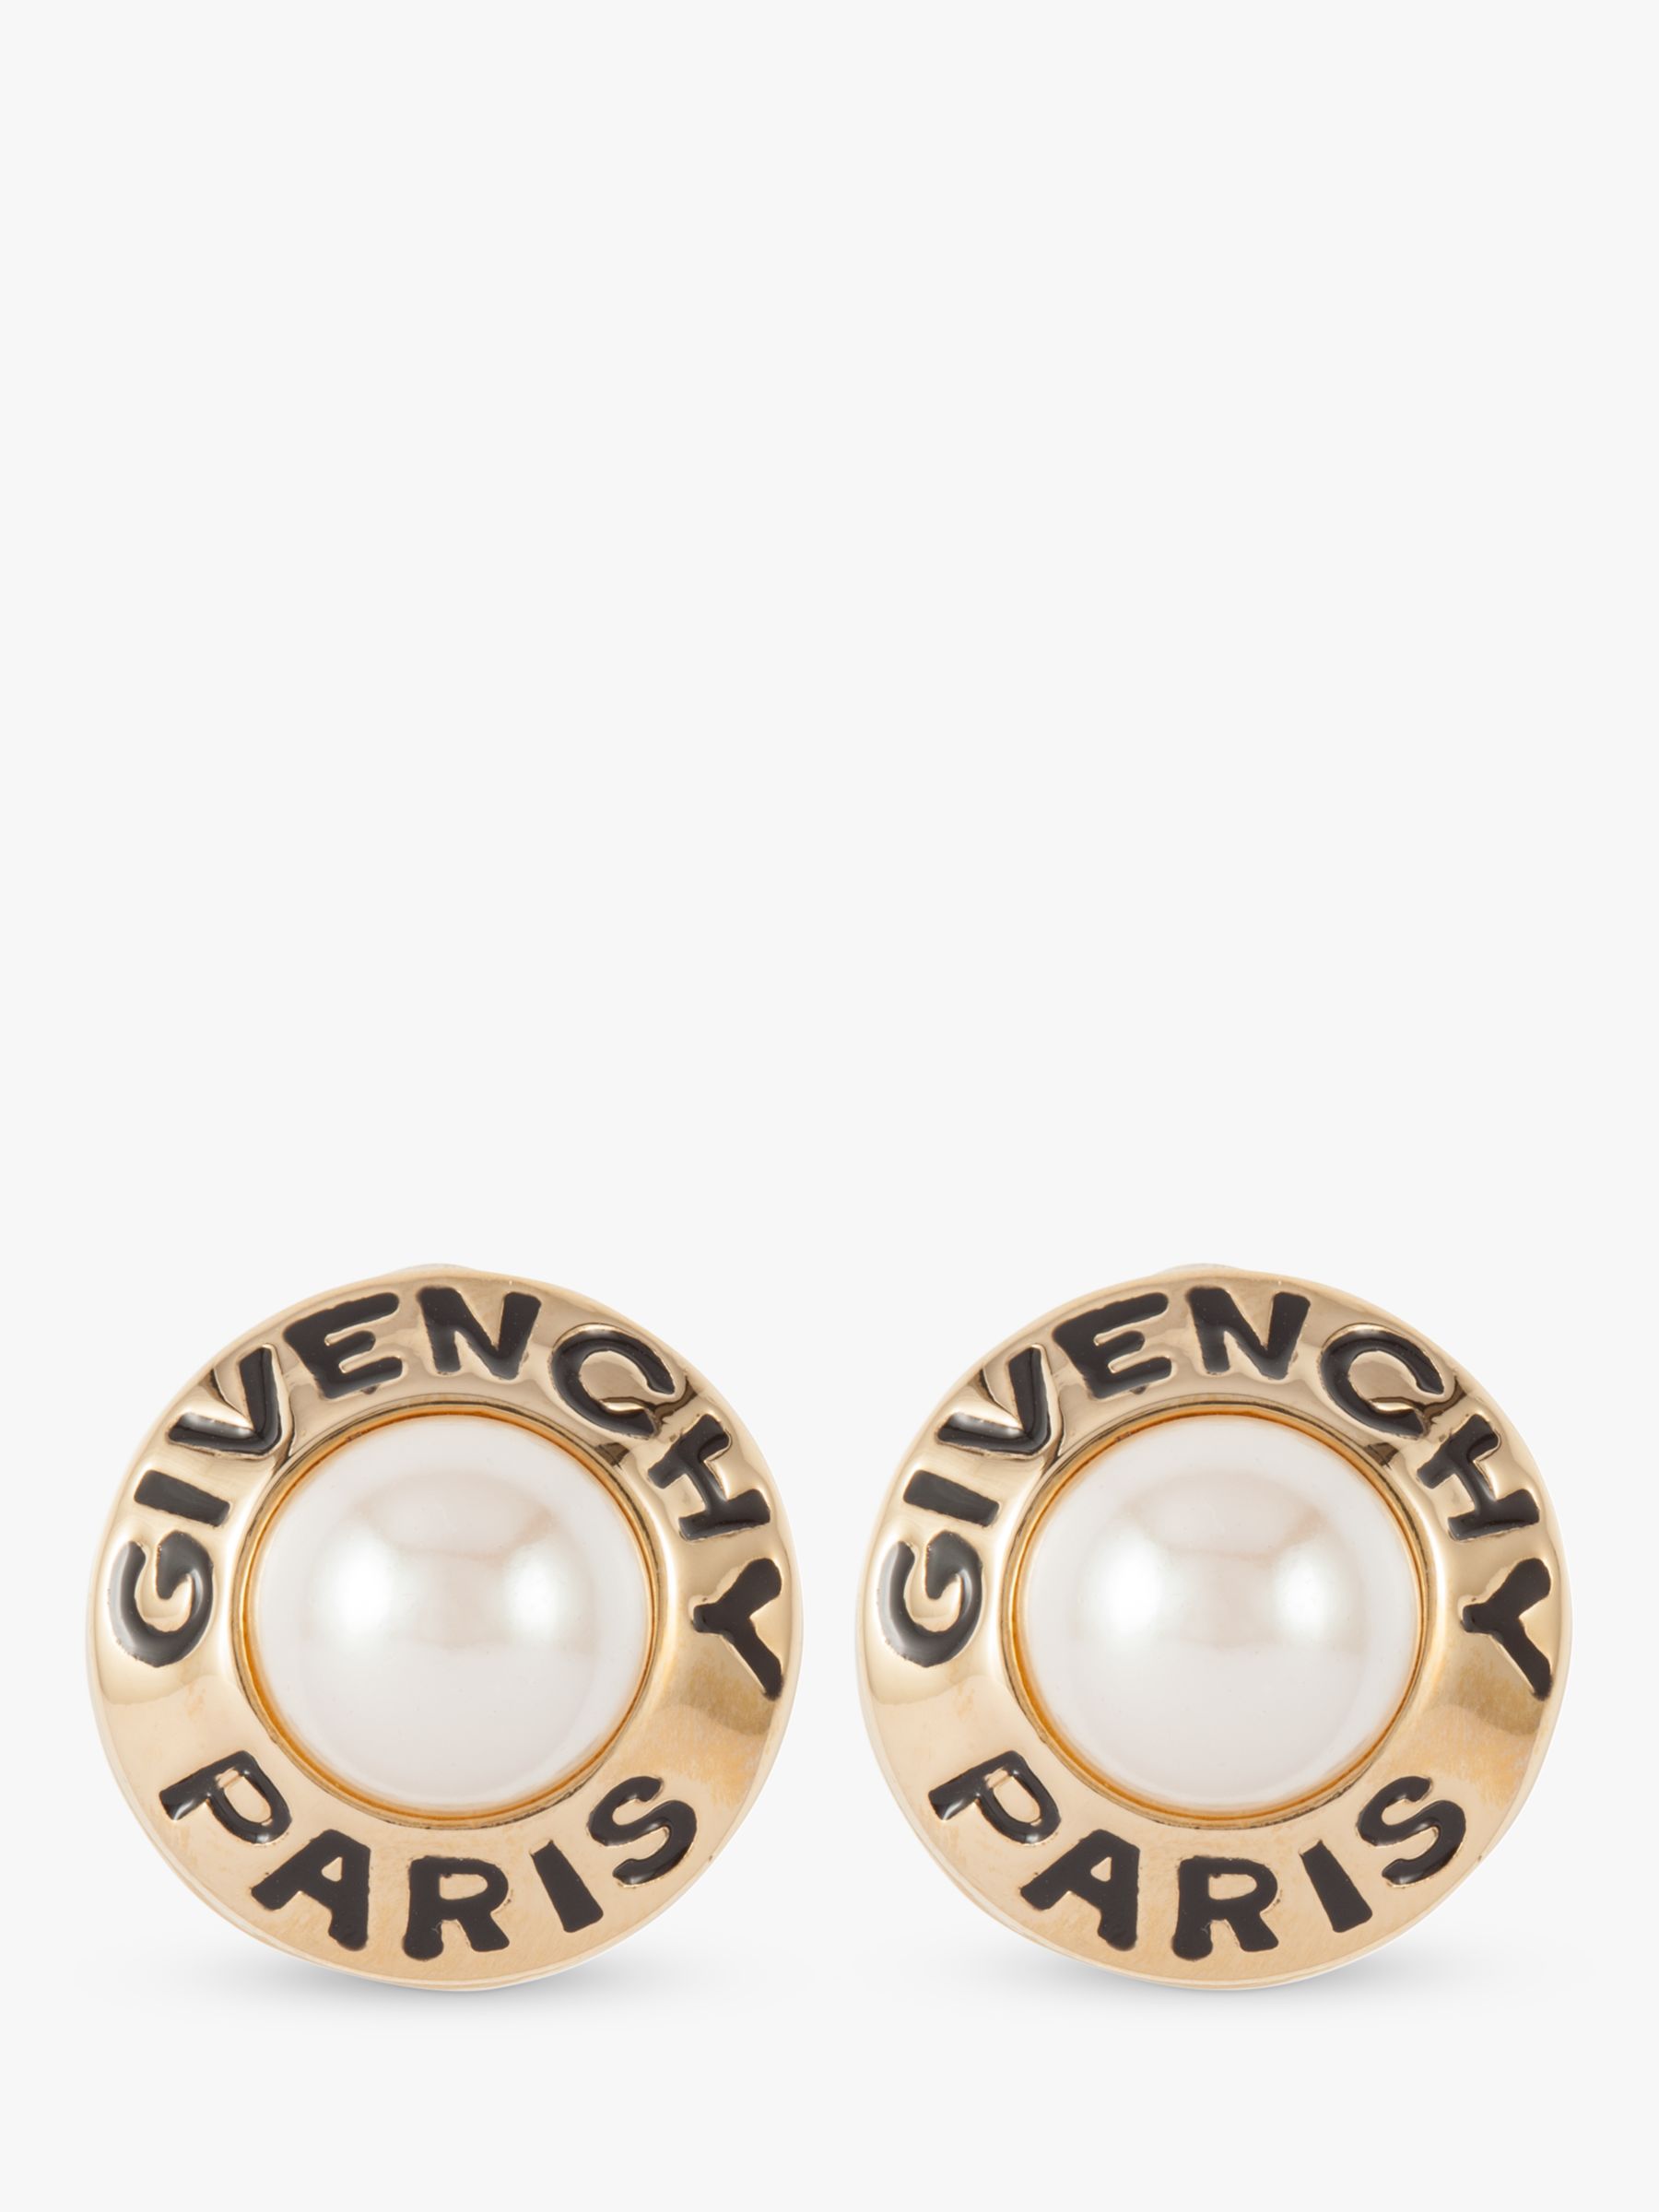 Susan Caplan Vintage Givenchy Gold Plated Faux Pearl Clip-On Stud Earrings,  Dated Circa 1980s at John Lewis & Partners